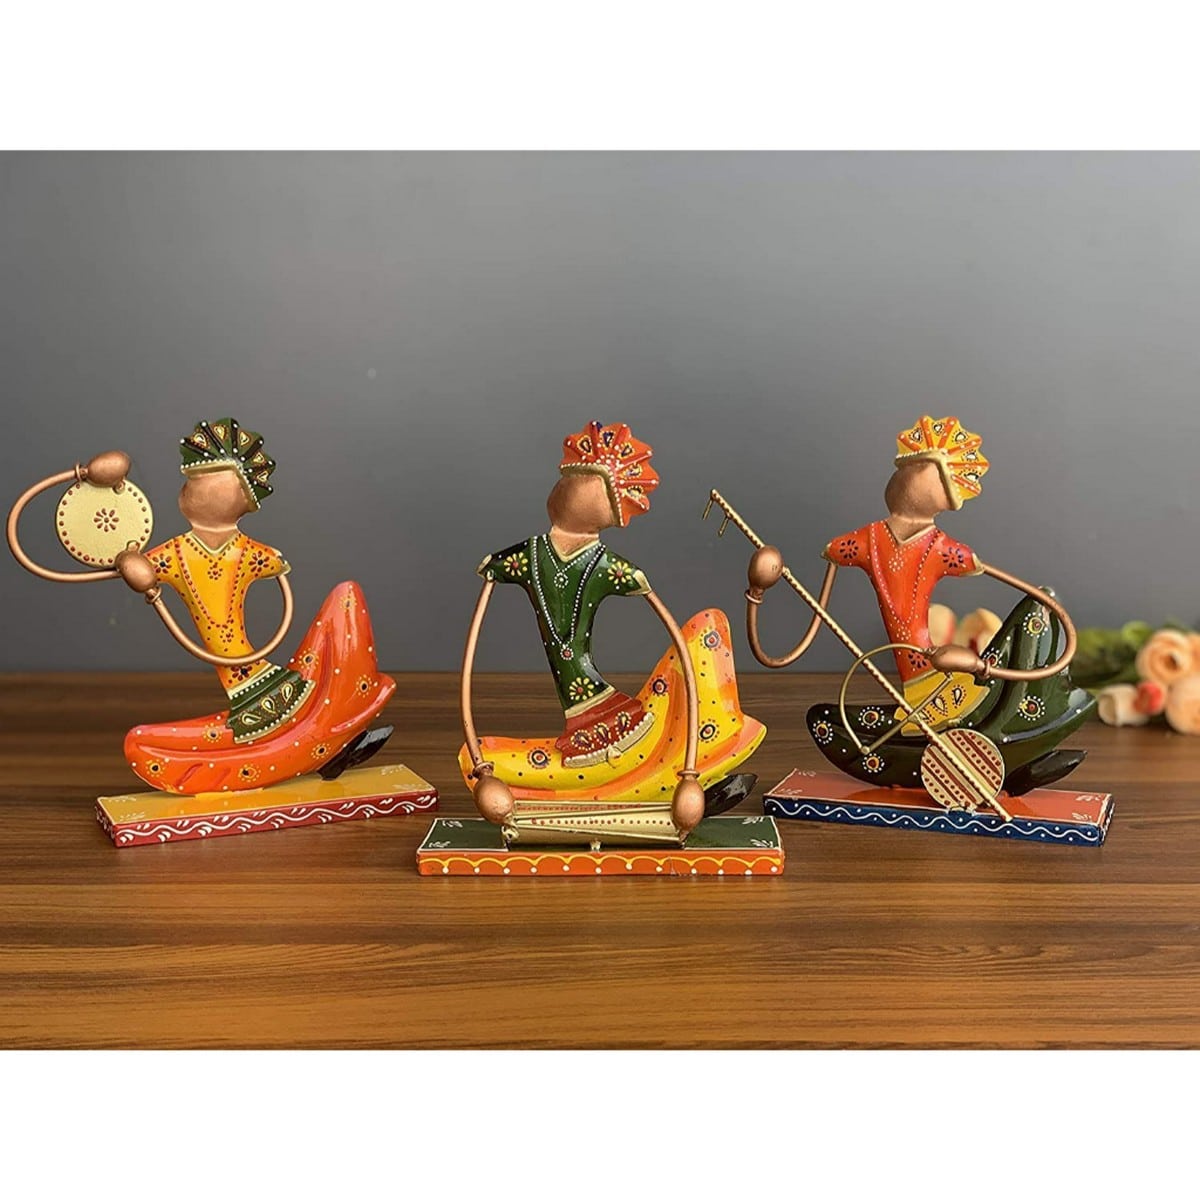 Harmony in Metal Discover the Soulful Rajasthani Musicians Metal Showpiece